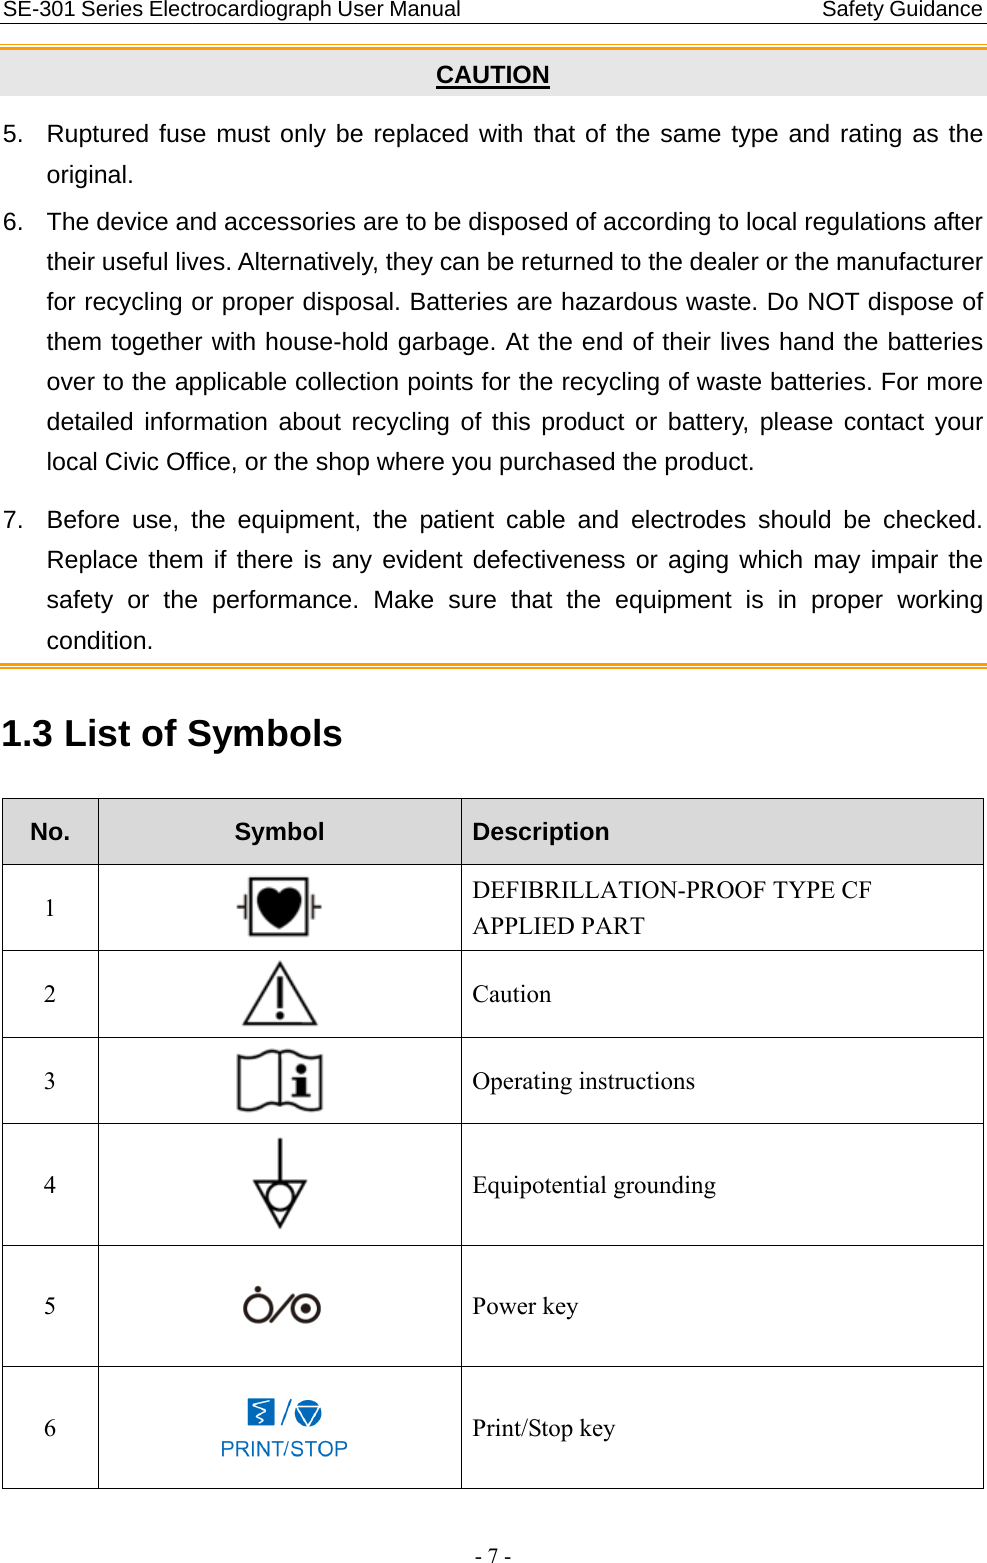 SE-301 Series Electrocardiograph User Manual                                 Safety Guidance - 7 - CAUTION 5.  Ruptured fuse must only be replaced with that of the same type and rating as the original. 6.  The device and accessories are to be disposed of according to local regulations after their useful lives. Alternatively, they can be returned to the dealer or the manufacturer for recycling or proper disposal. Batteries are hazardous waste. Do NOT dispose of them together with house-hold garbage. At the end of their lives hand the batteries over to the applicable collection points for the recycling of waste batteries. For more detailed information about recycling of this product or battery, please contact your local Civic Office, or the shop where you purchased the product. 7.  Before use, the equipment, the patient cable and electrodes should be checked. Replace them if there is any evident defectiveness or aging which may impair the safety or the performance. Make sure that the equipment is in proper working condition. 1.3 List of Symbols No.  Symbol  Description 1  DEFIBRILLATION-PROOF TYPE CF APPLIED PART 2  Caution 3   Operating instructions 4  Equipotential grounding 5  Power key 6  Print/Stop key 